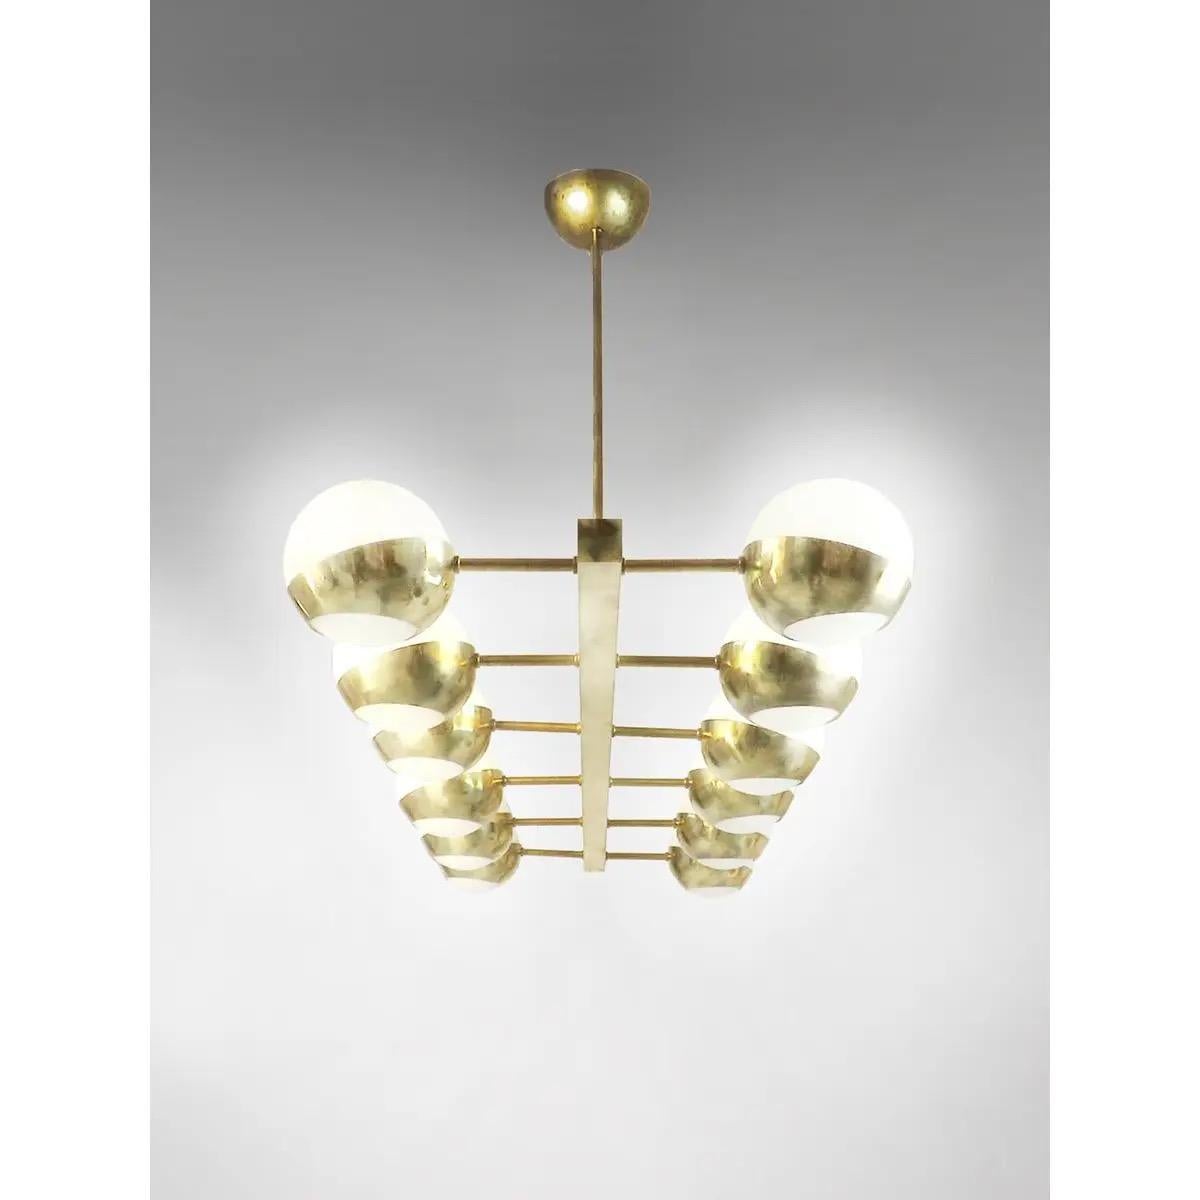 Italian Mid Century style brass chandelier featuring 16 ball lights made of opaline glass of 12 cm diameter each, on a brass vintage treated structure. 

This Italian chandelier pays homage to the timeless and iconic style of the Italian